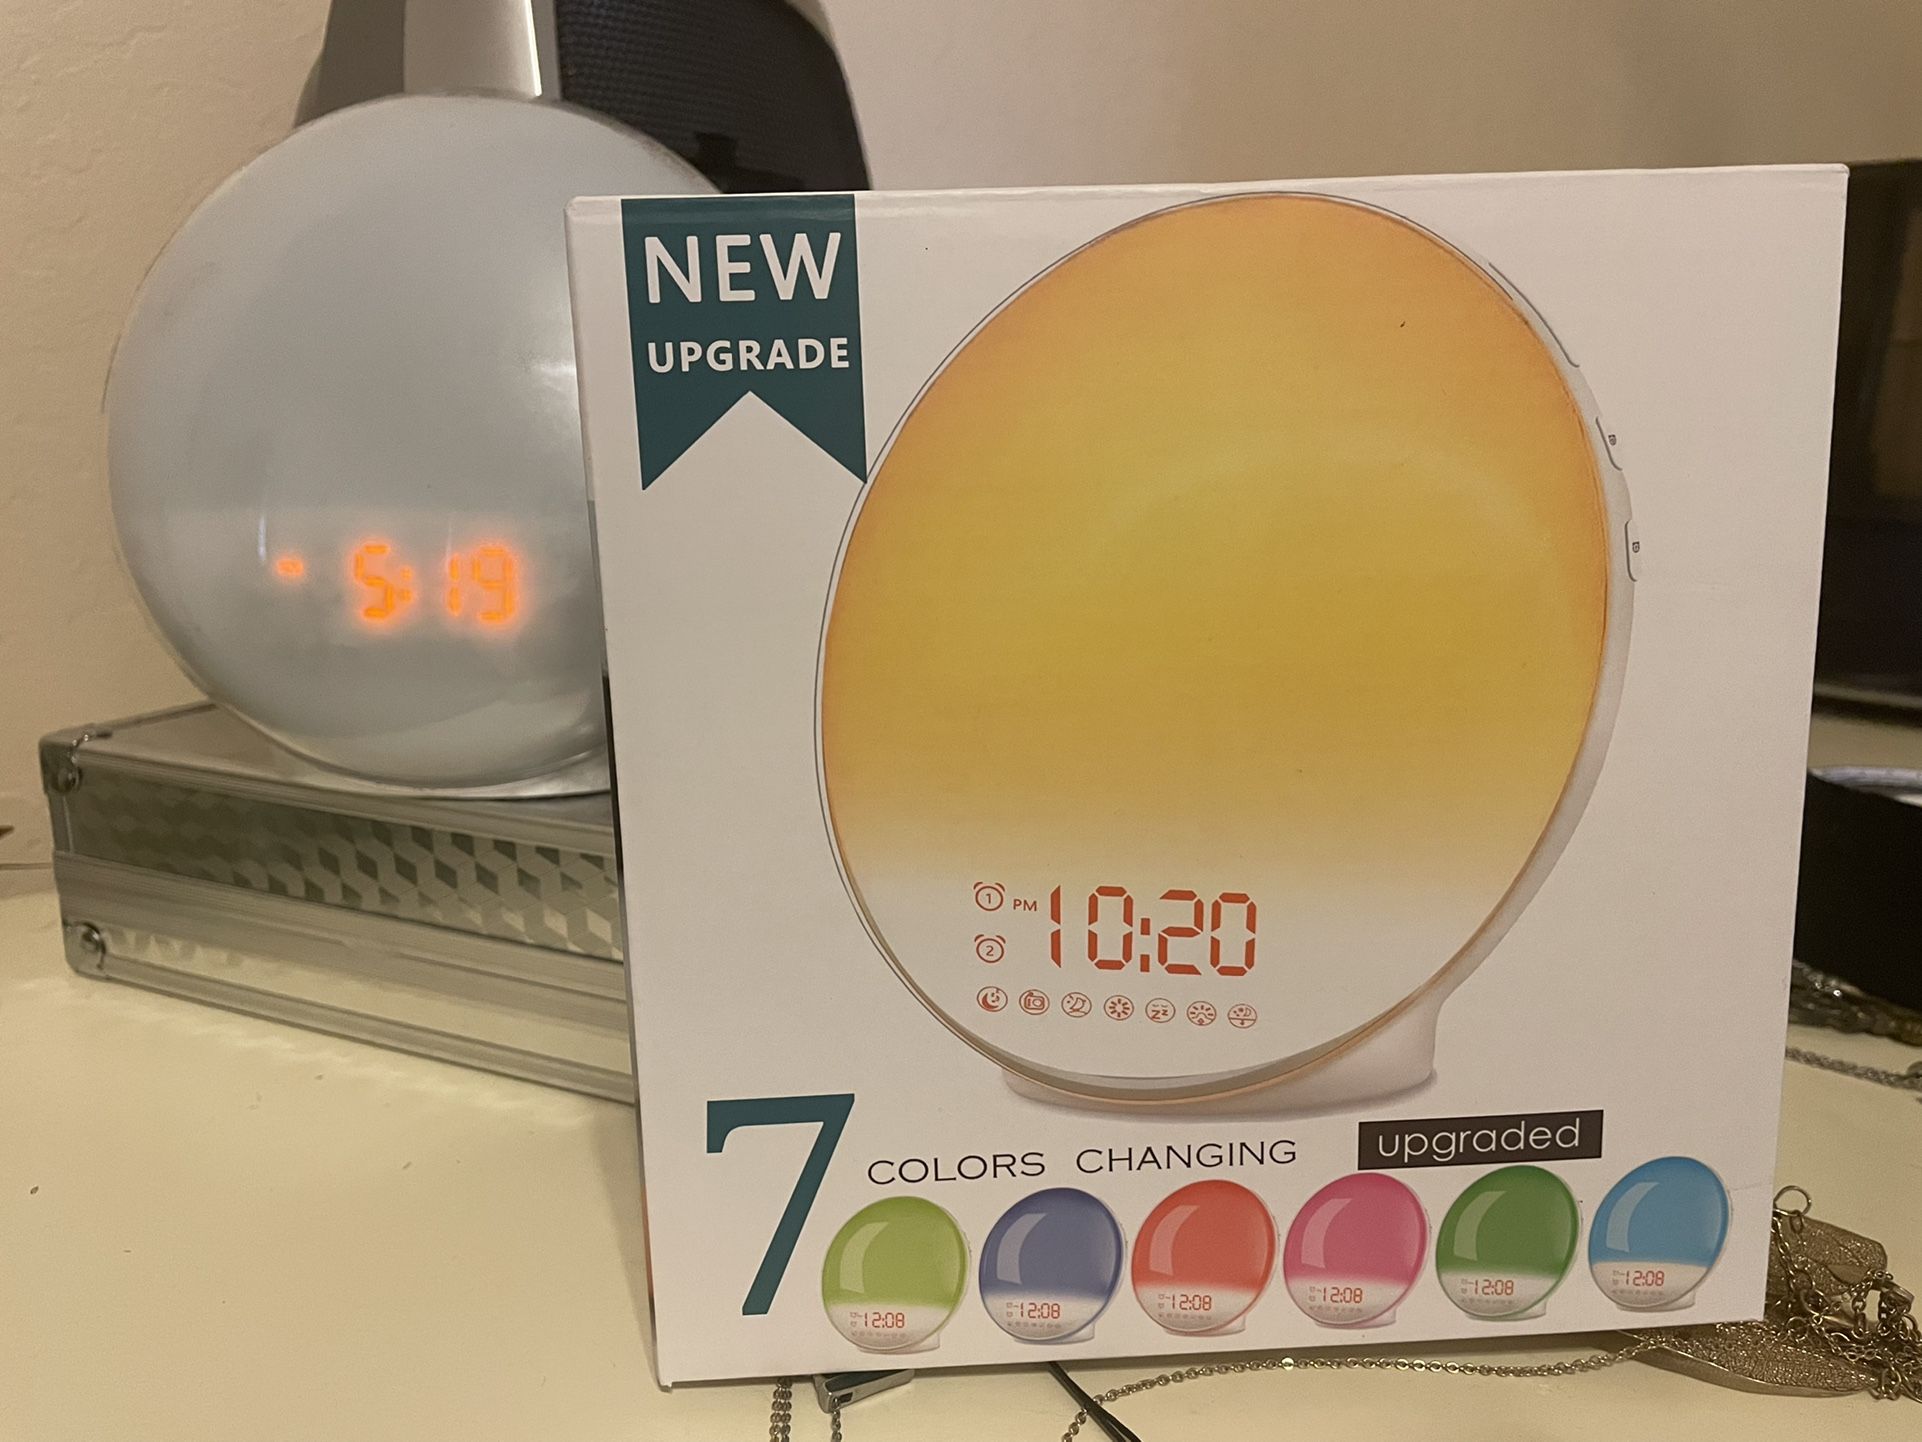 Alarm Clock That Helps You Wake Out Of REM So You Aren’t Tired!!!